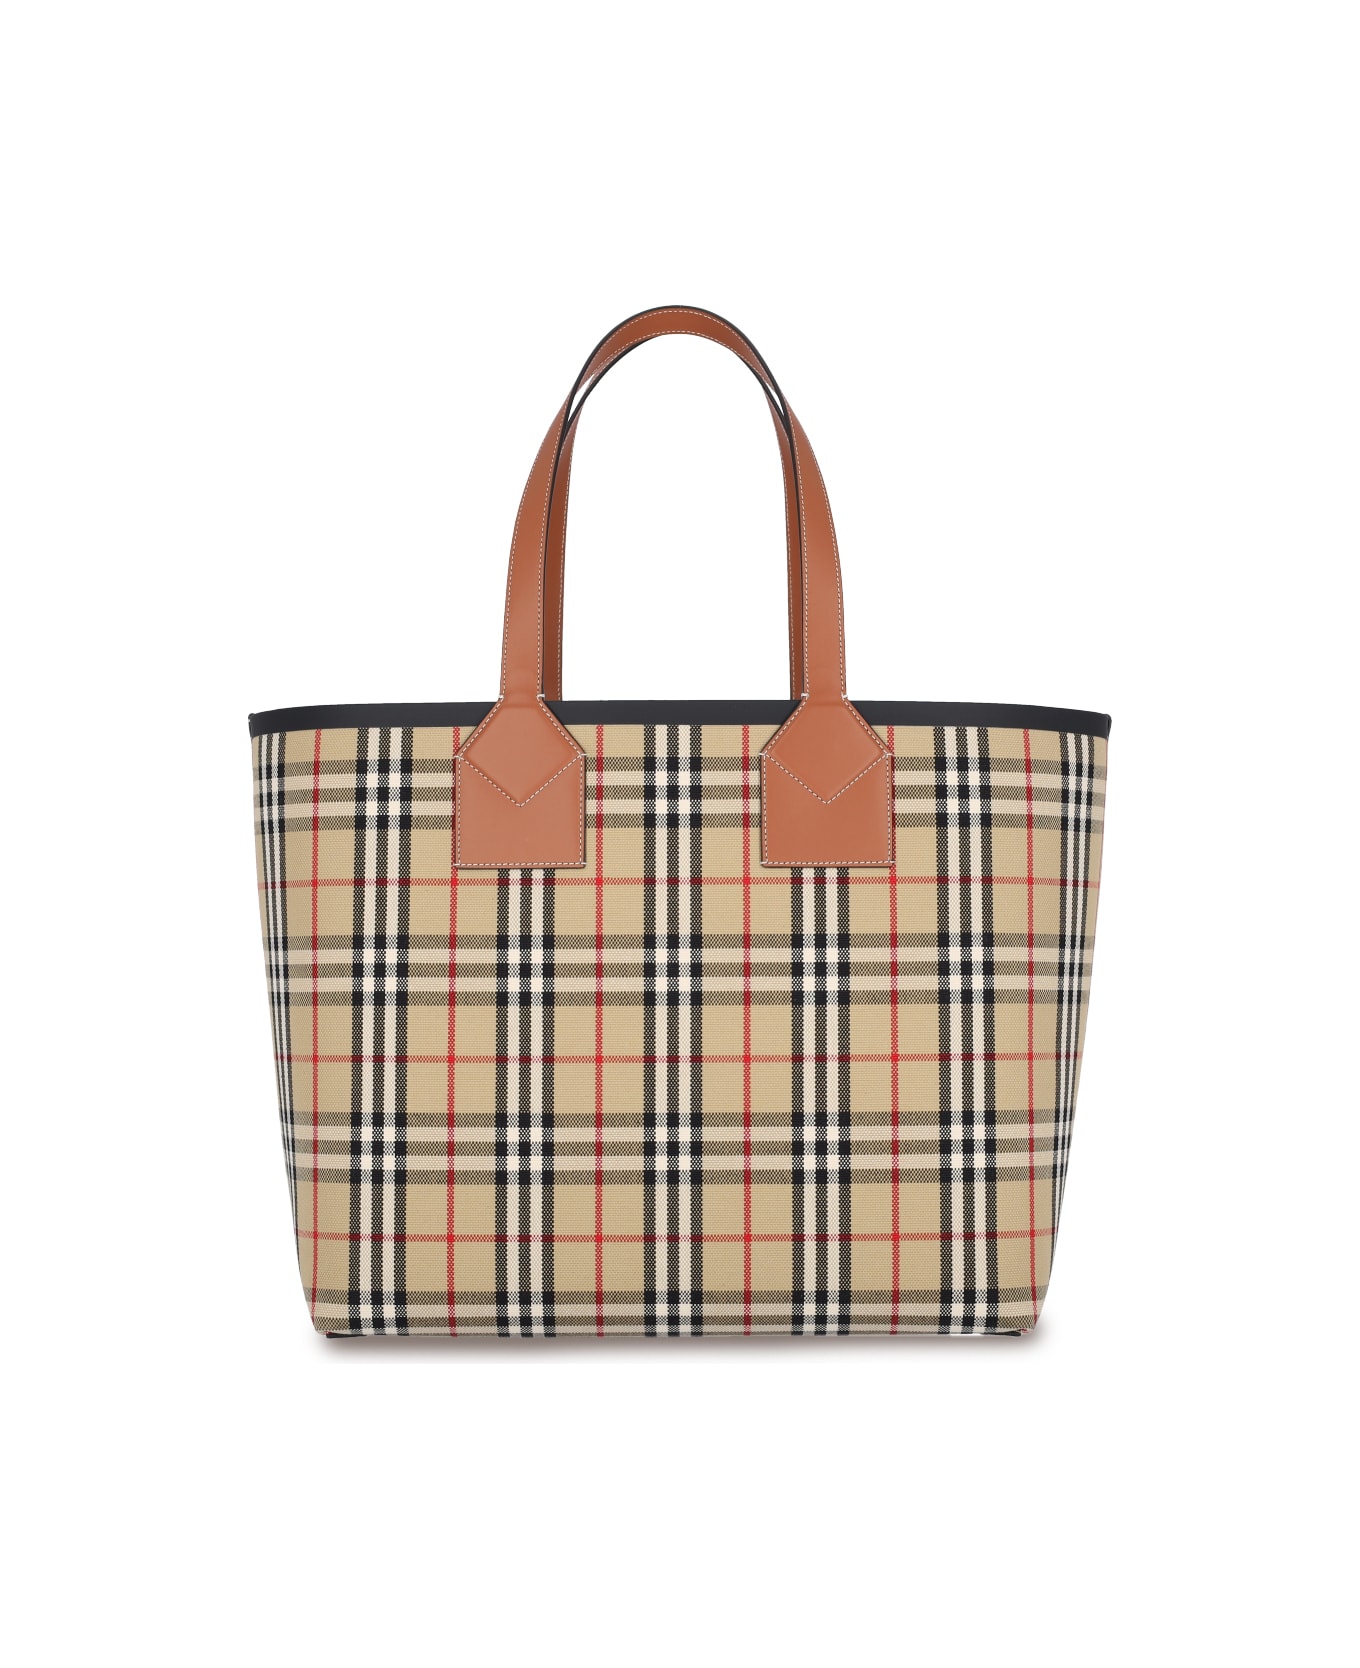 Burberry Large London Tote Bag - Brown トートバッグ